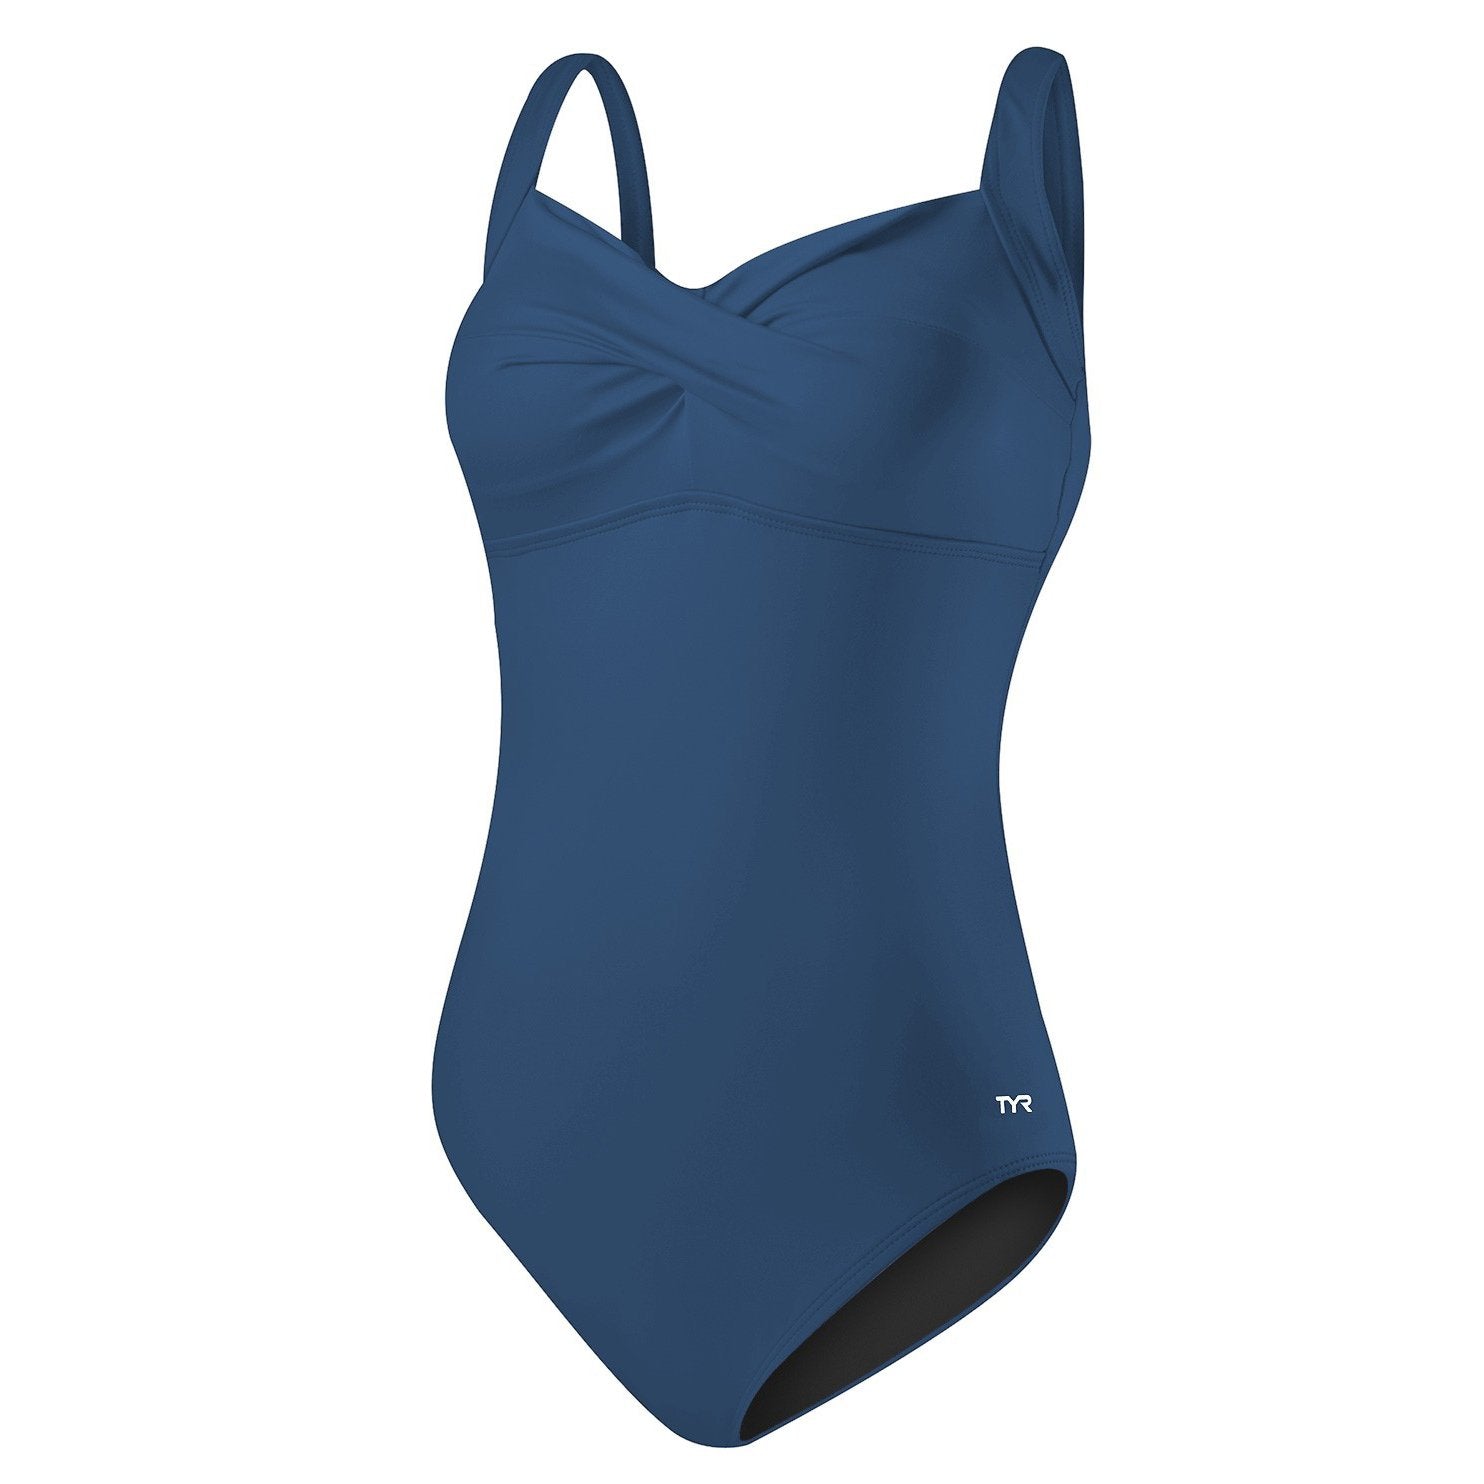 TYR Built-In Bra Swimsuits